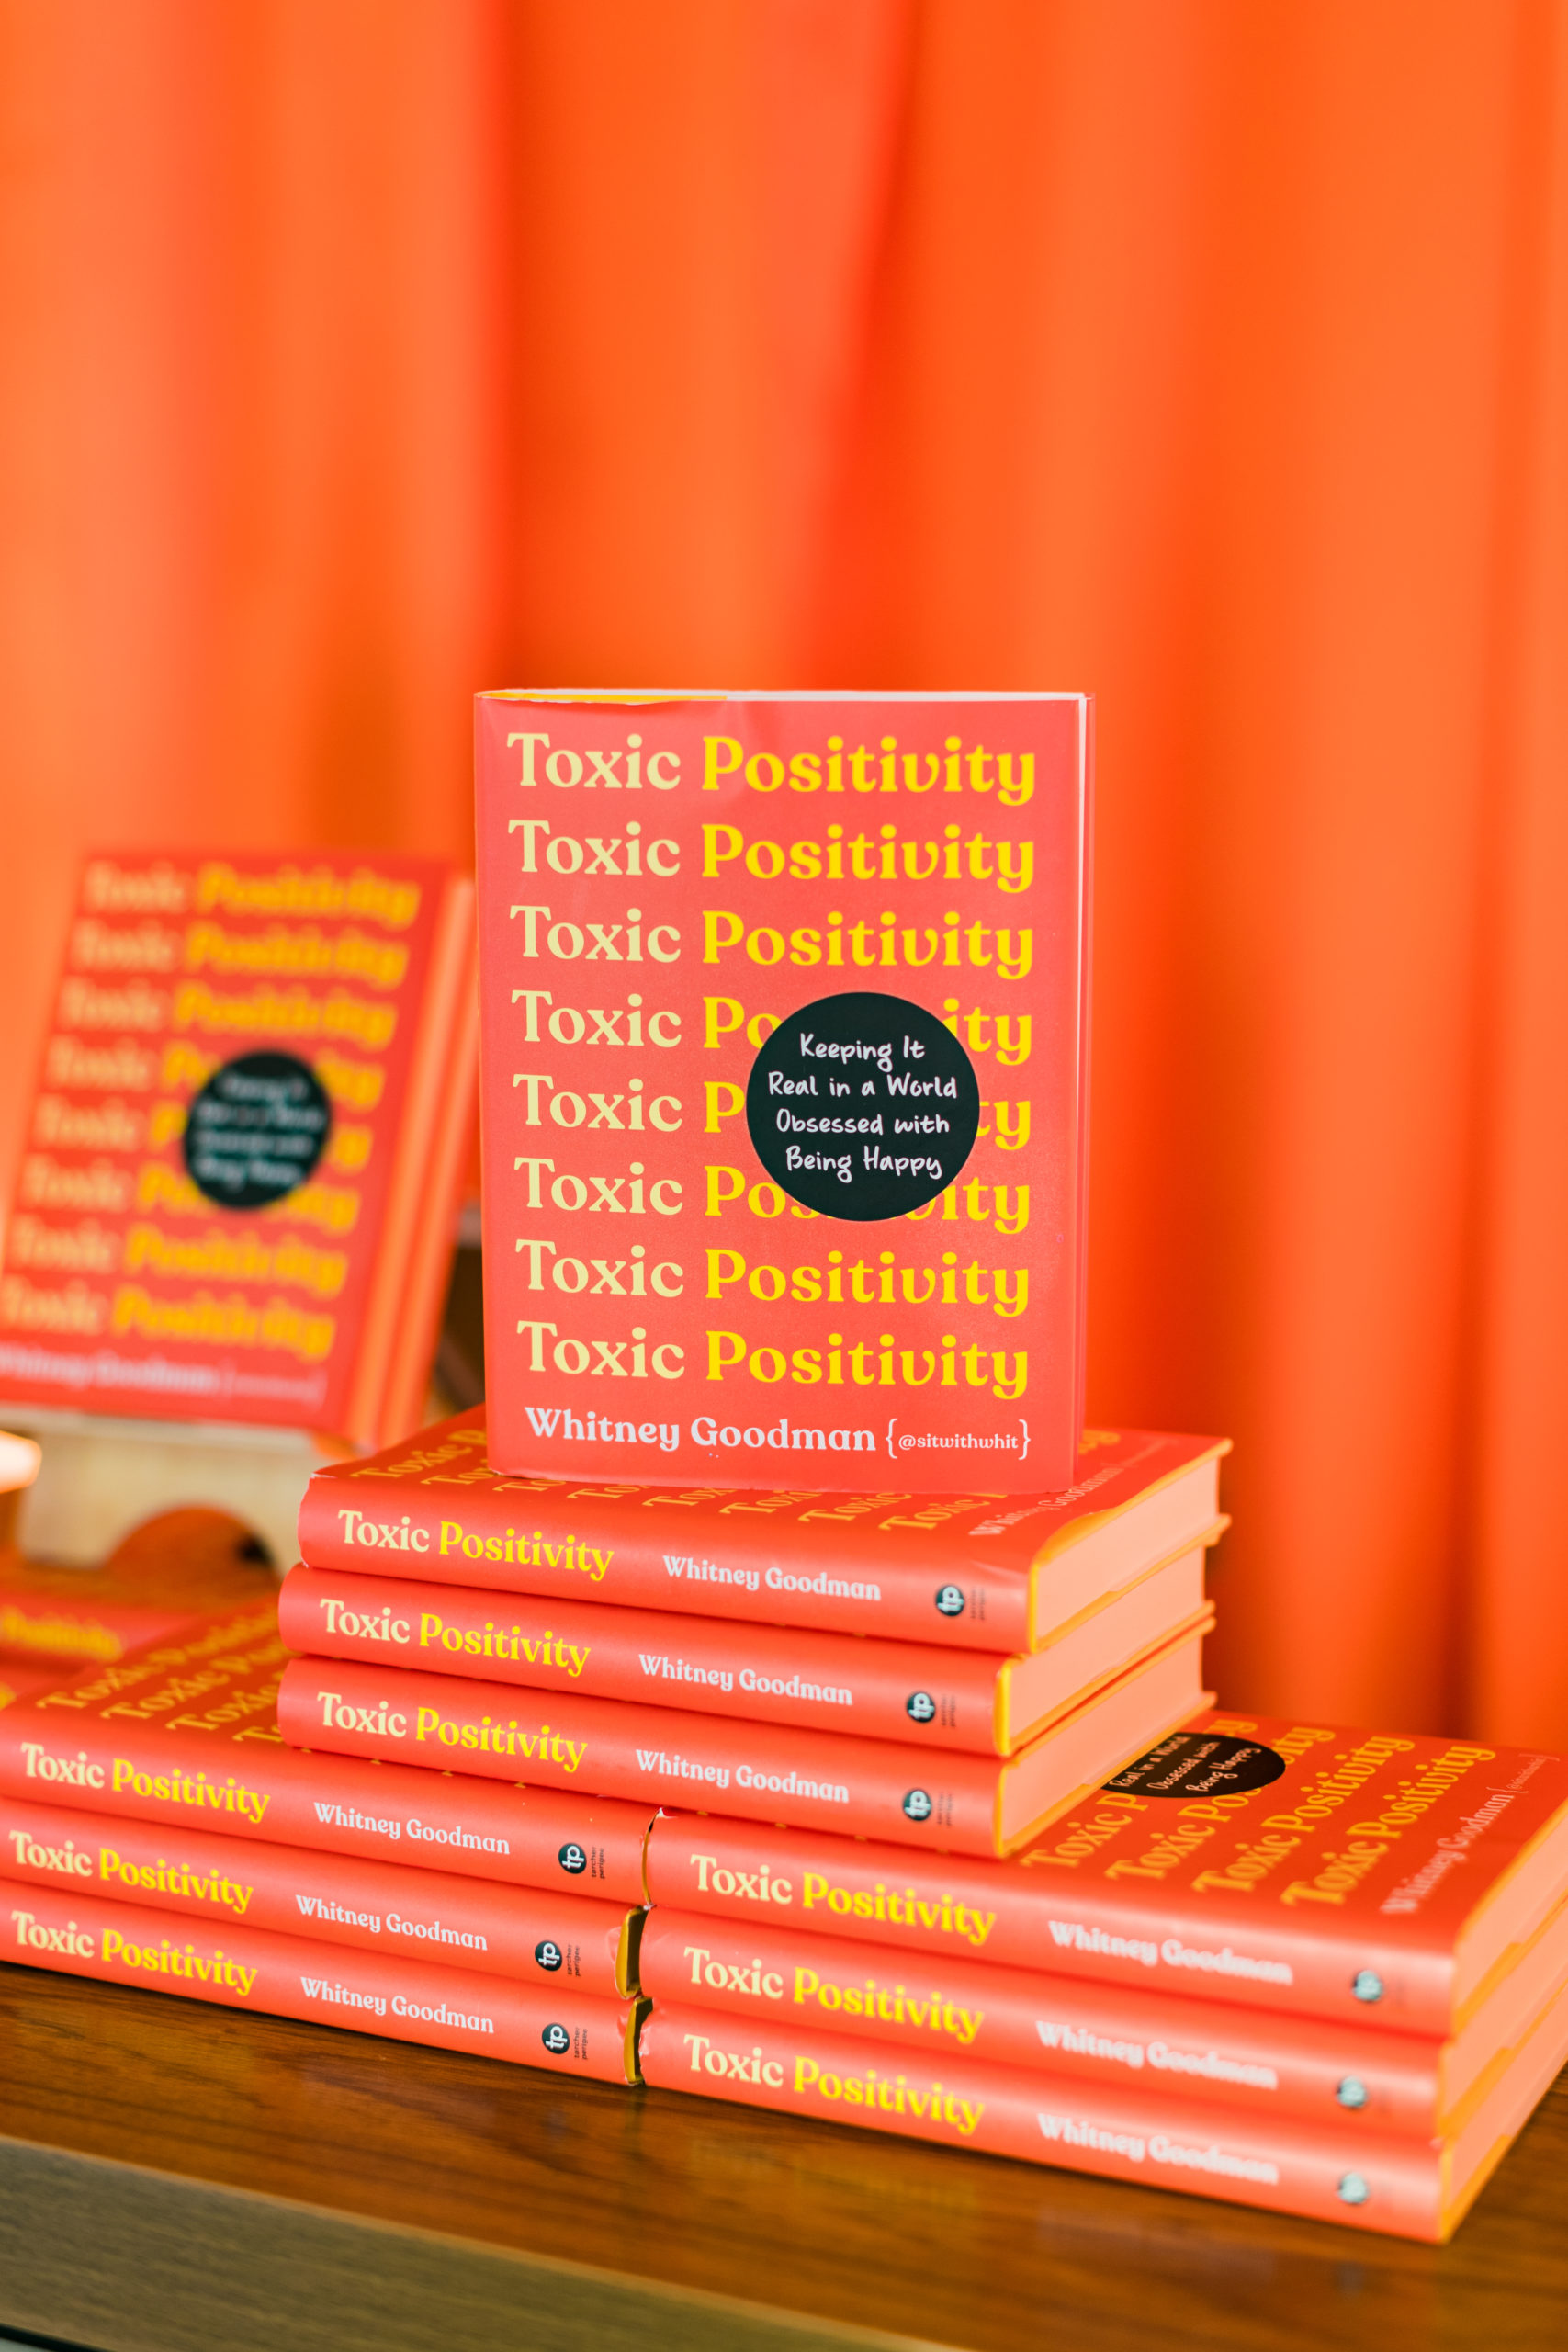 whitney goodman is the author of toxic positivity and creator of the term toxic positivity